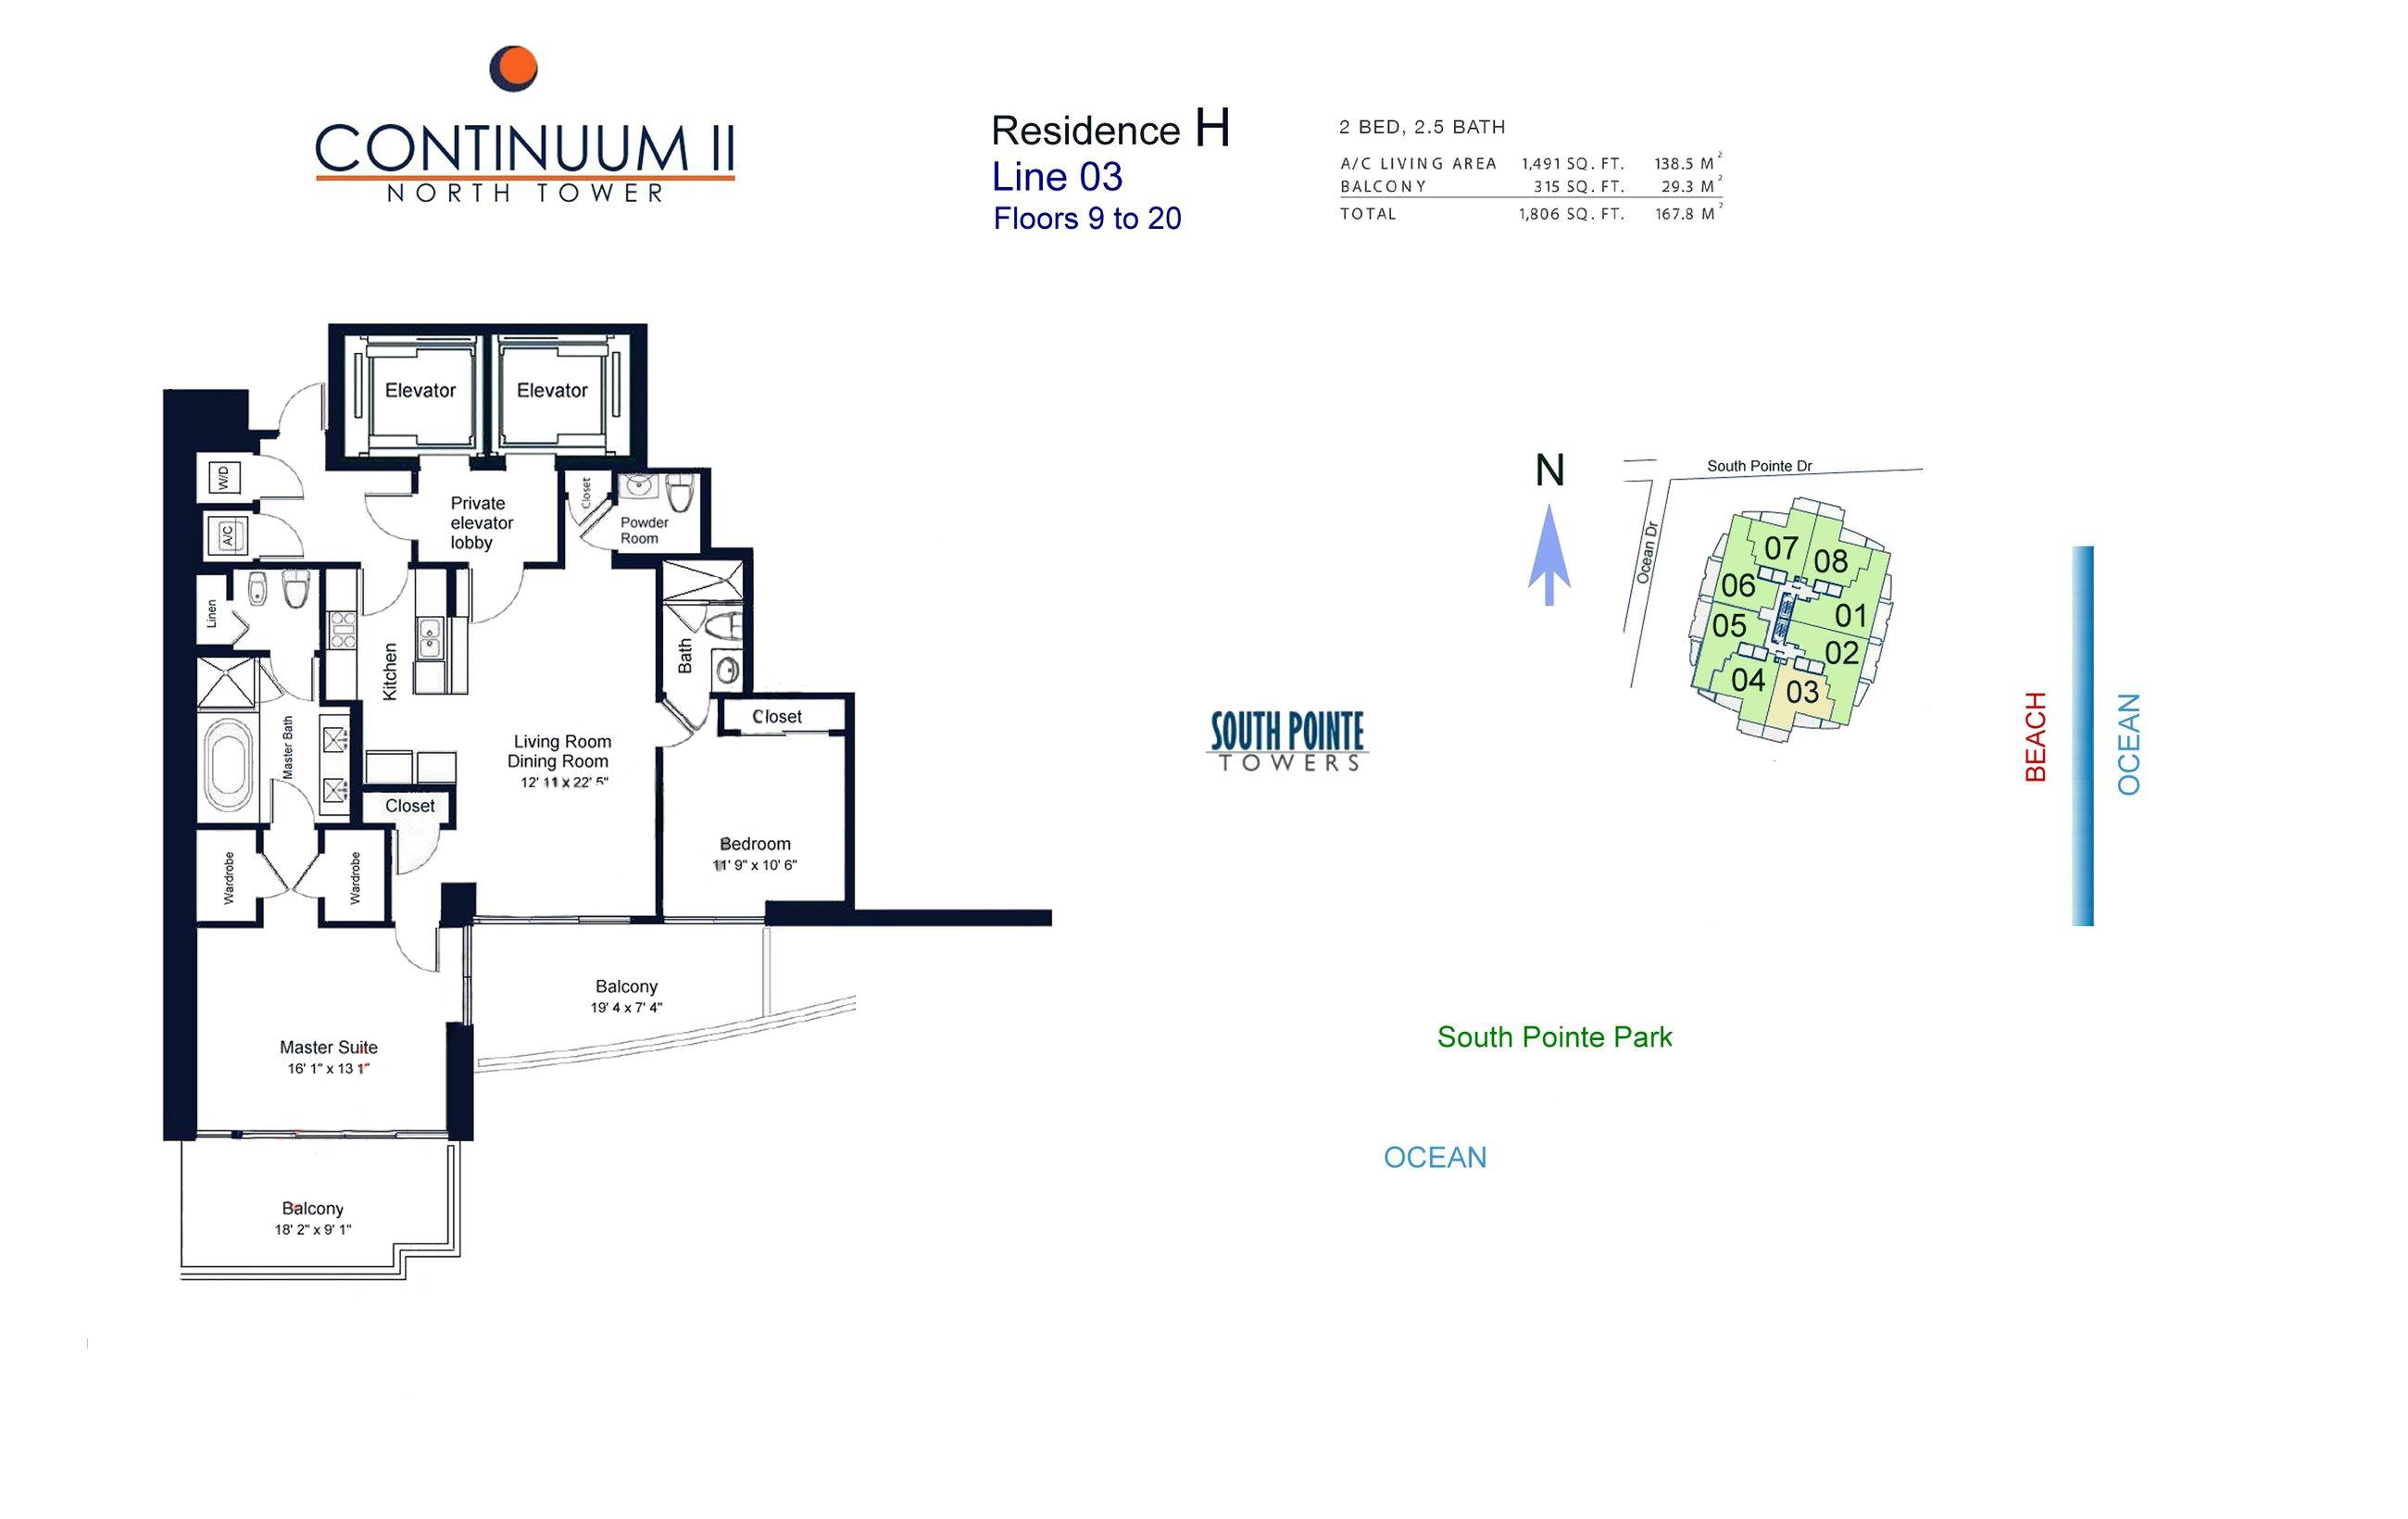 Continuum North Tower Residence H Line 03